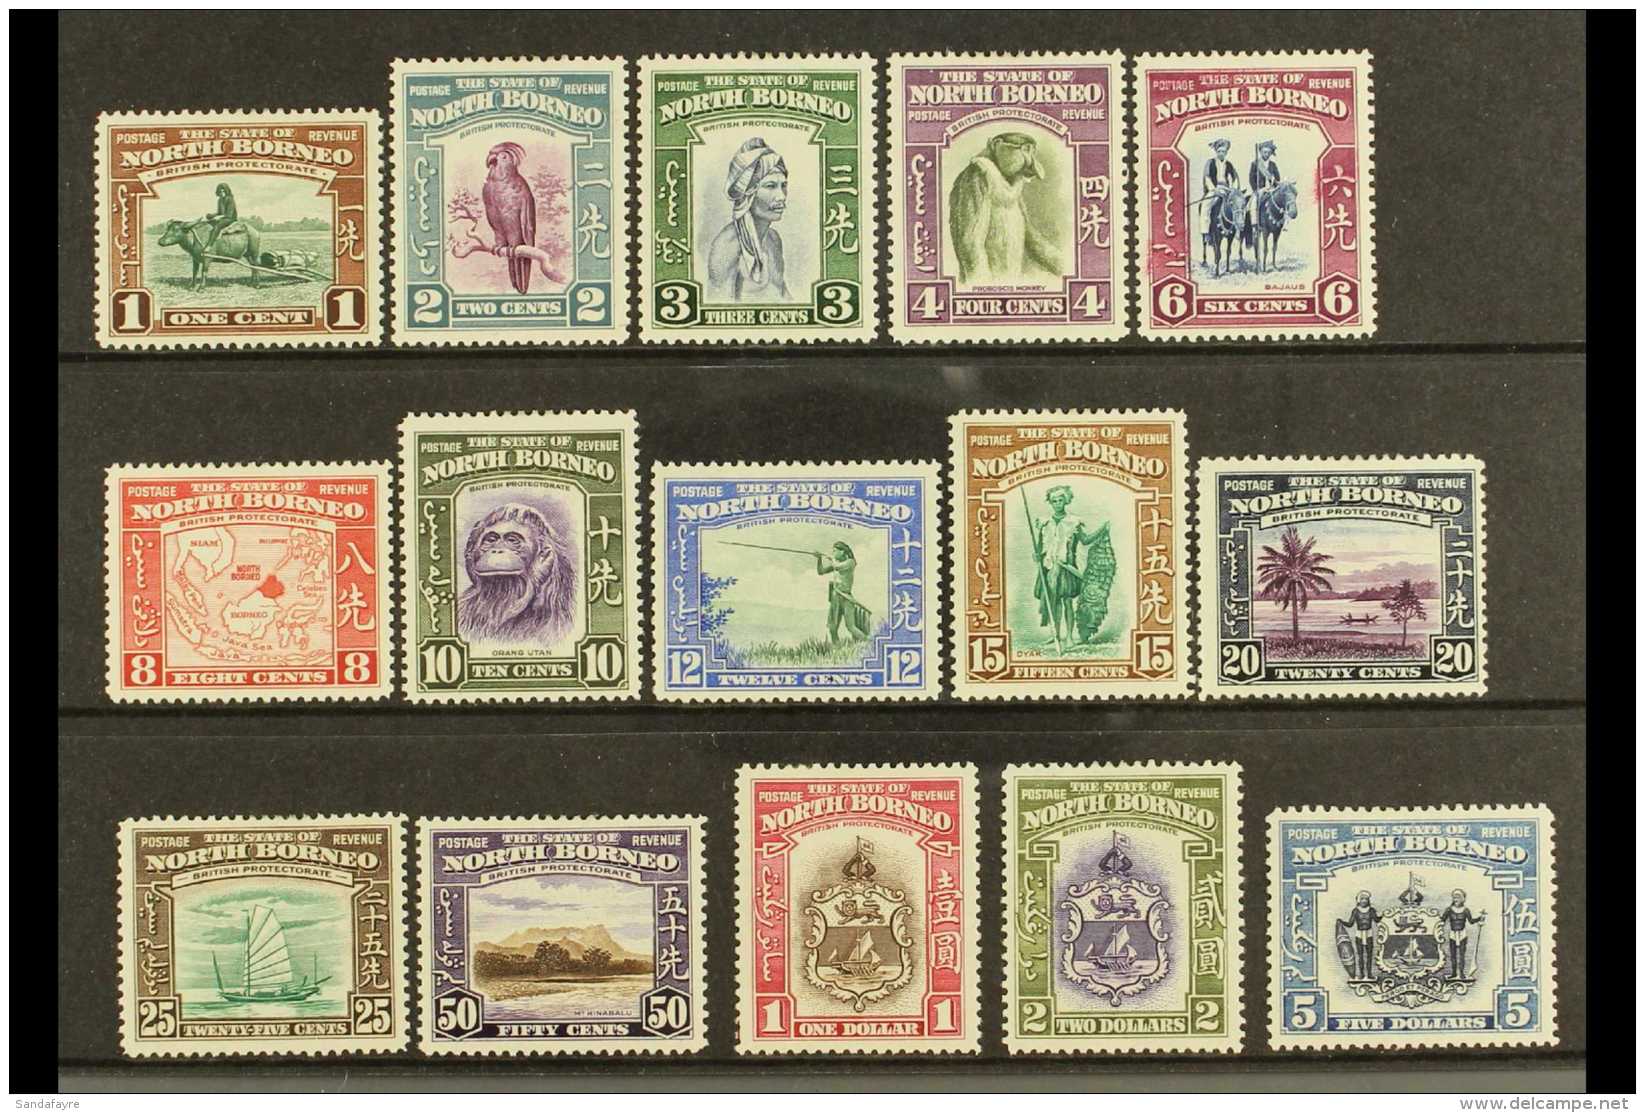 1939 Pictorial Definitives Complete Set, SG 303/17, Very Fine Lightly Hinged Mint (15 Stamps) For More Images,... - Bornéo Du Nord (...-1963)